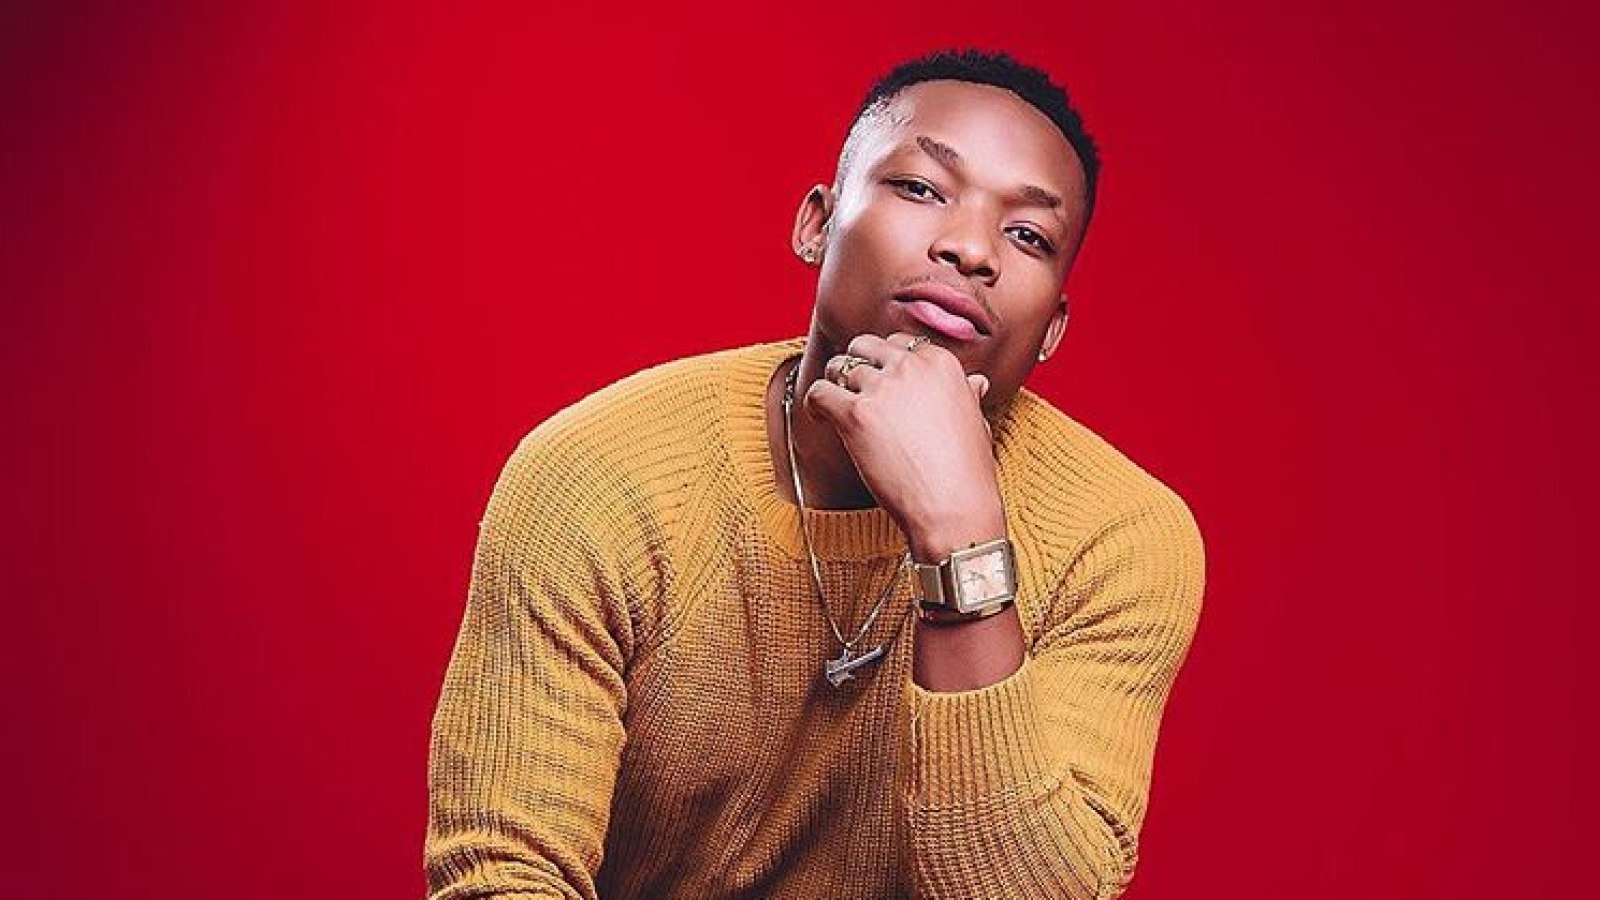 Otile Brown reaches out to his ex in 'Quarantine'